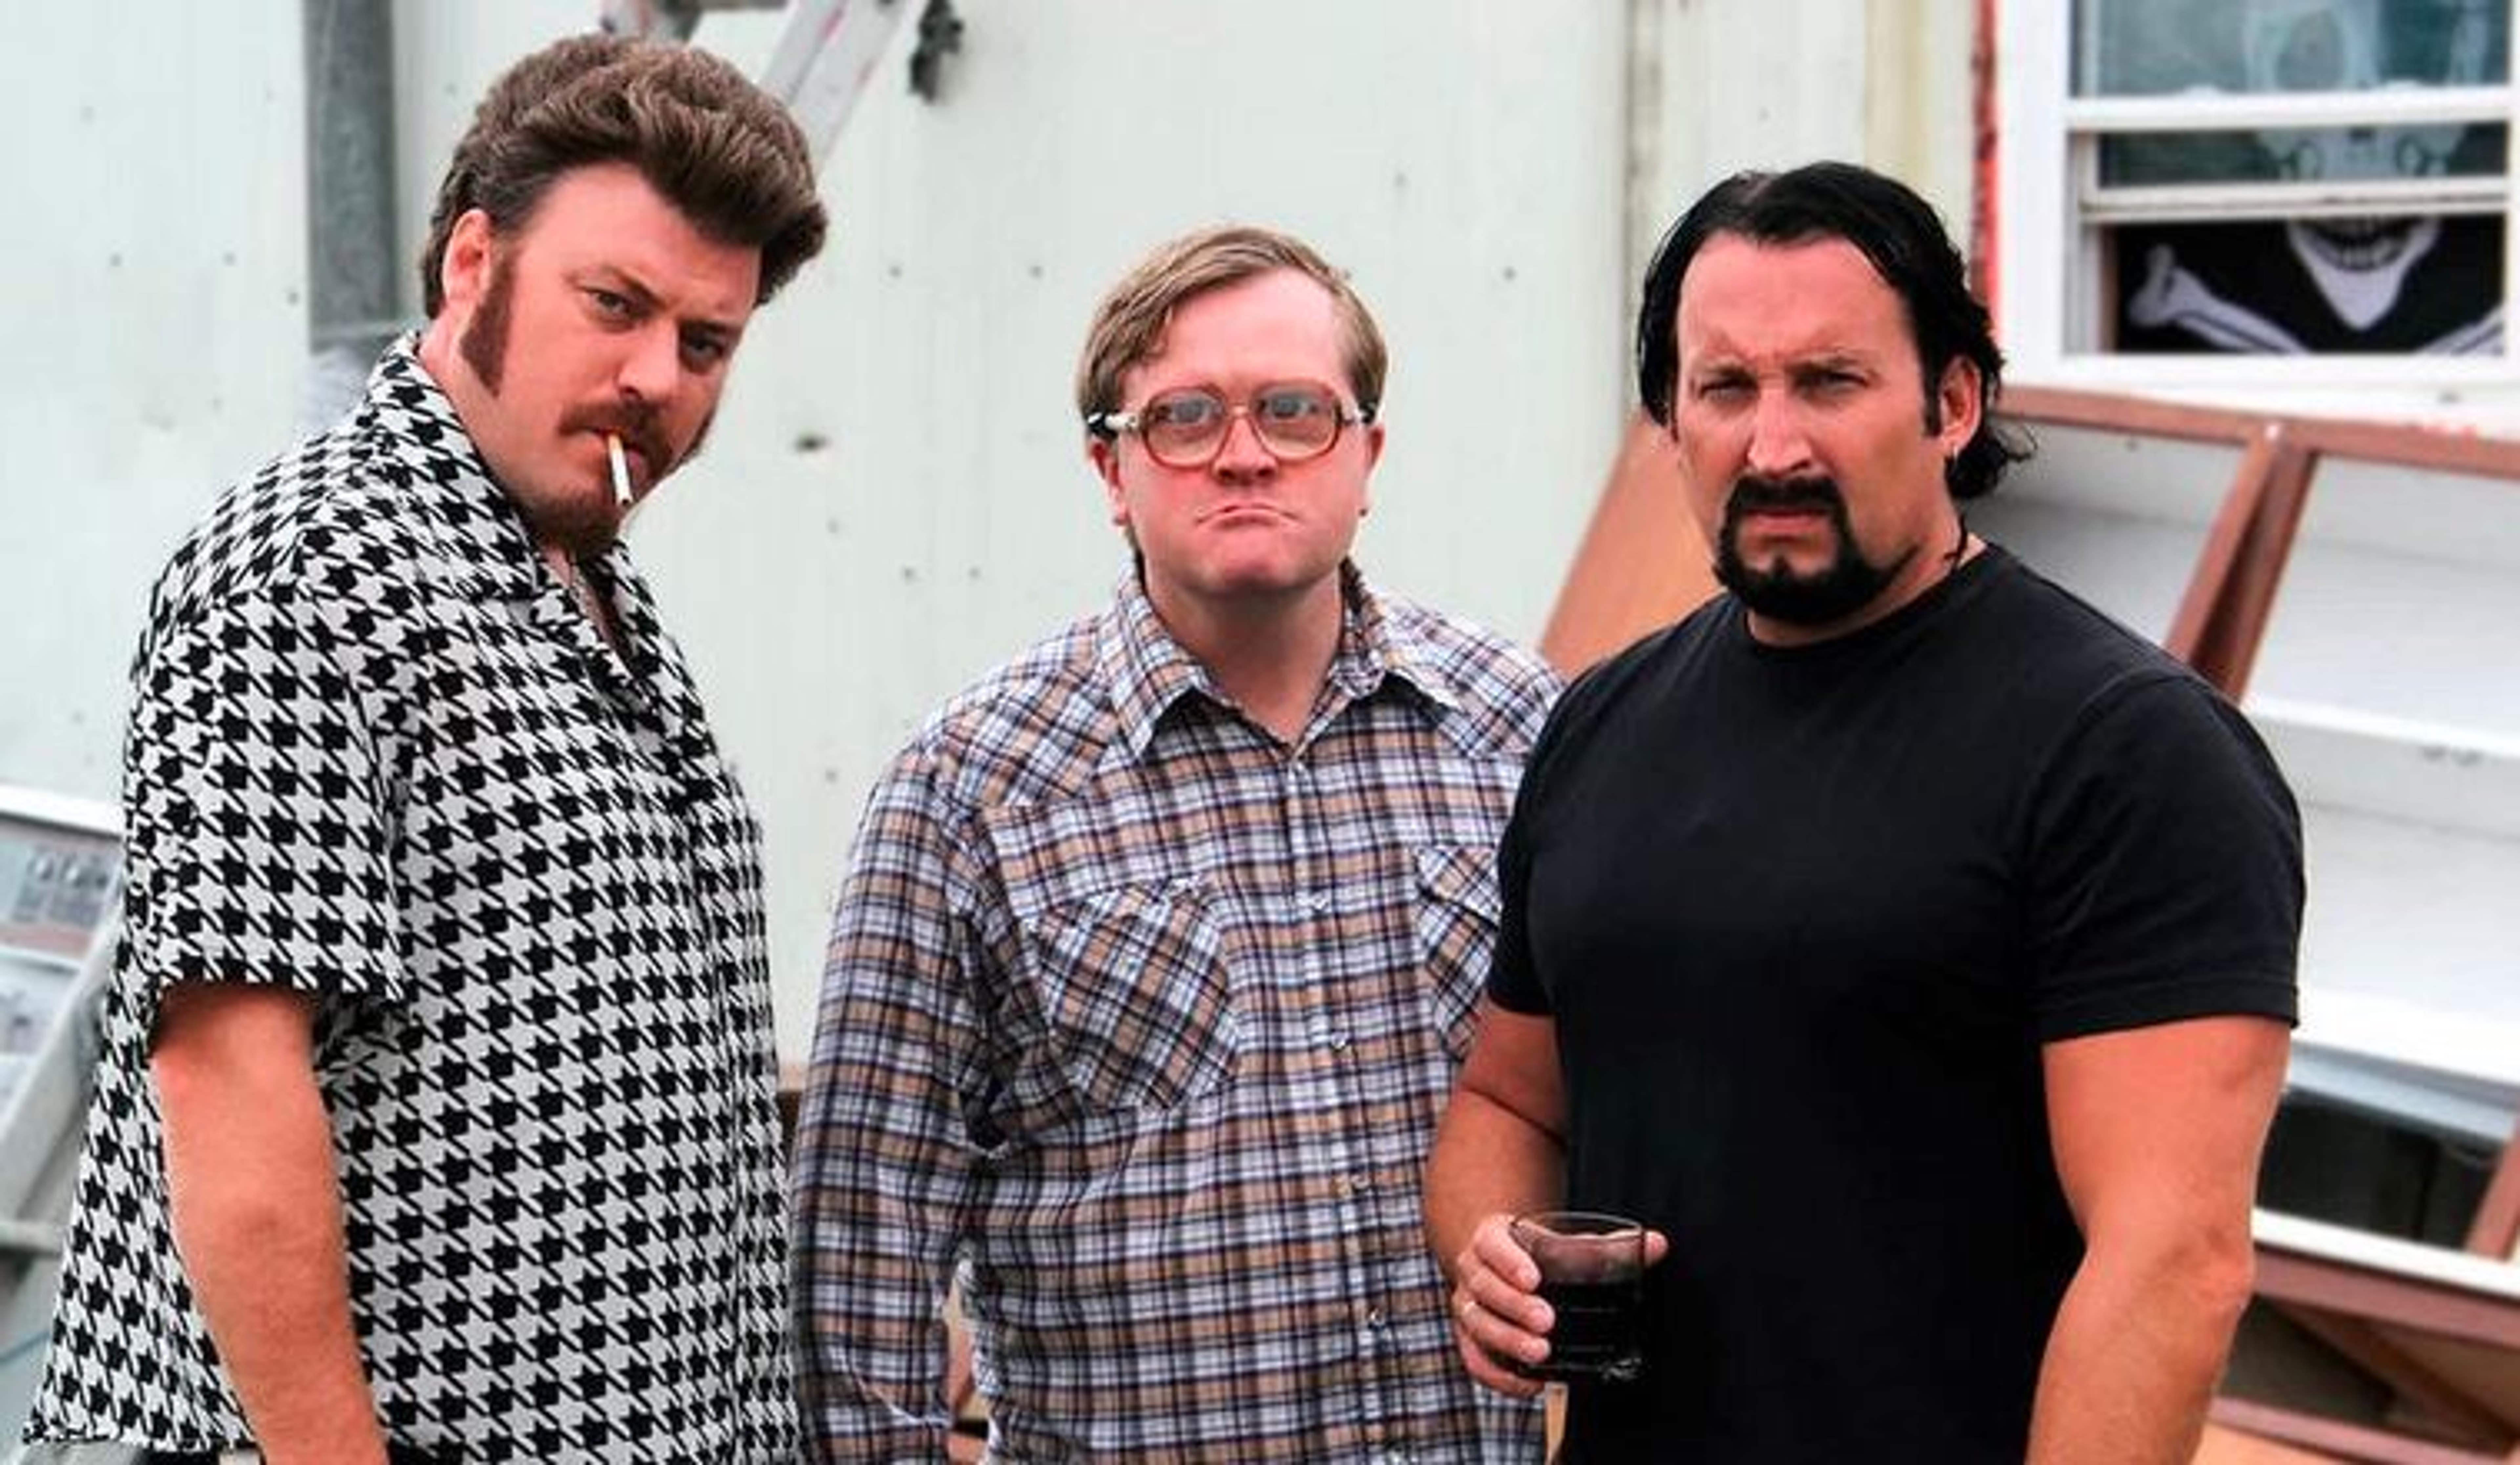 EXCLUSIVE VIDEO: The Trailer Park Boys Are Growing Hemp, Will They Cultivate Cannabis Too?